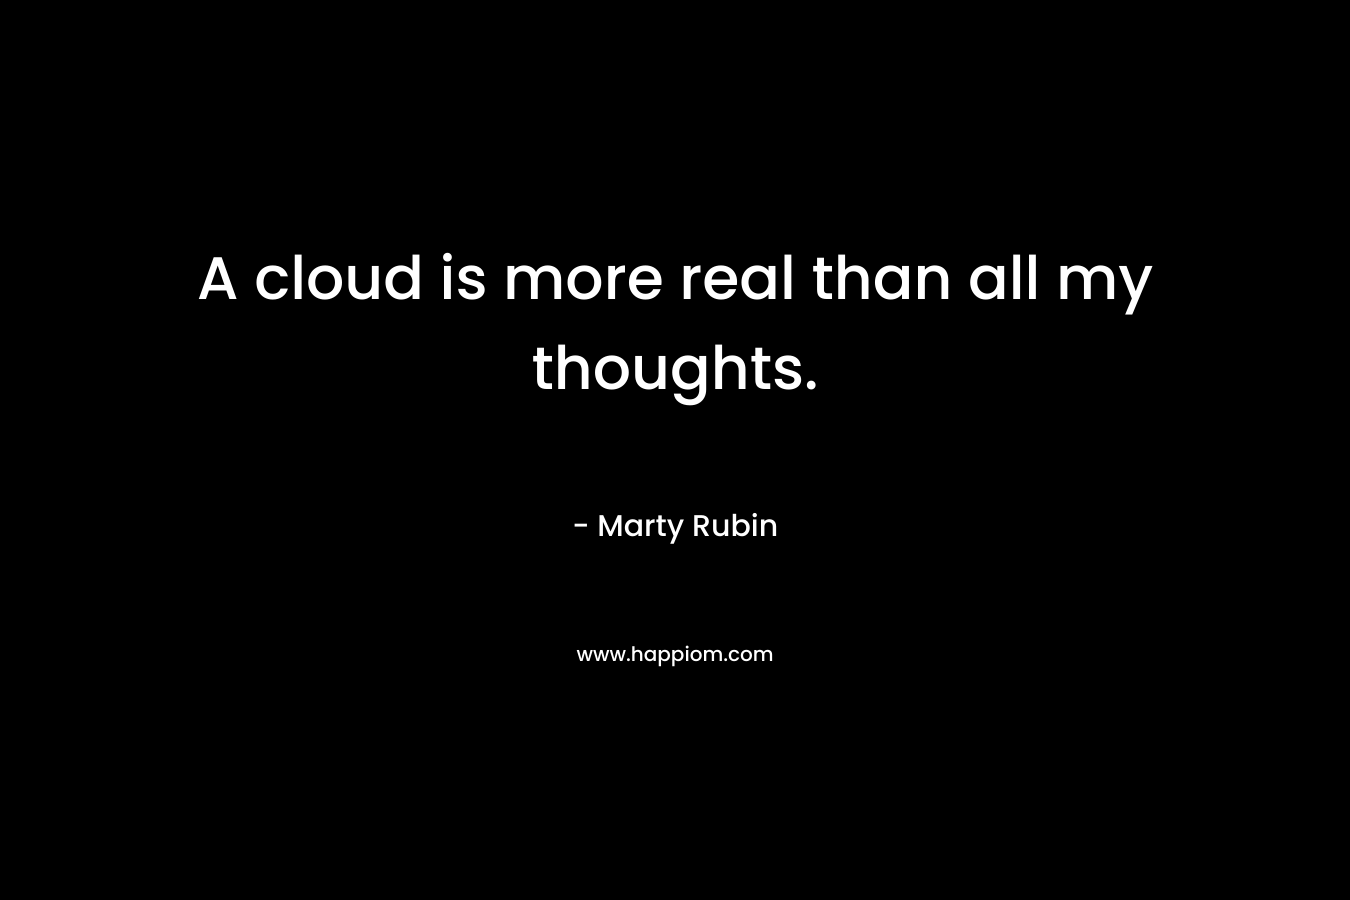 A cloud is more real than all my thoughts.